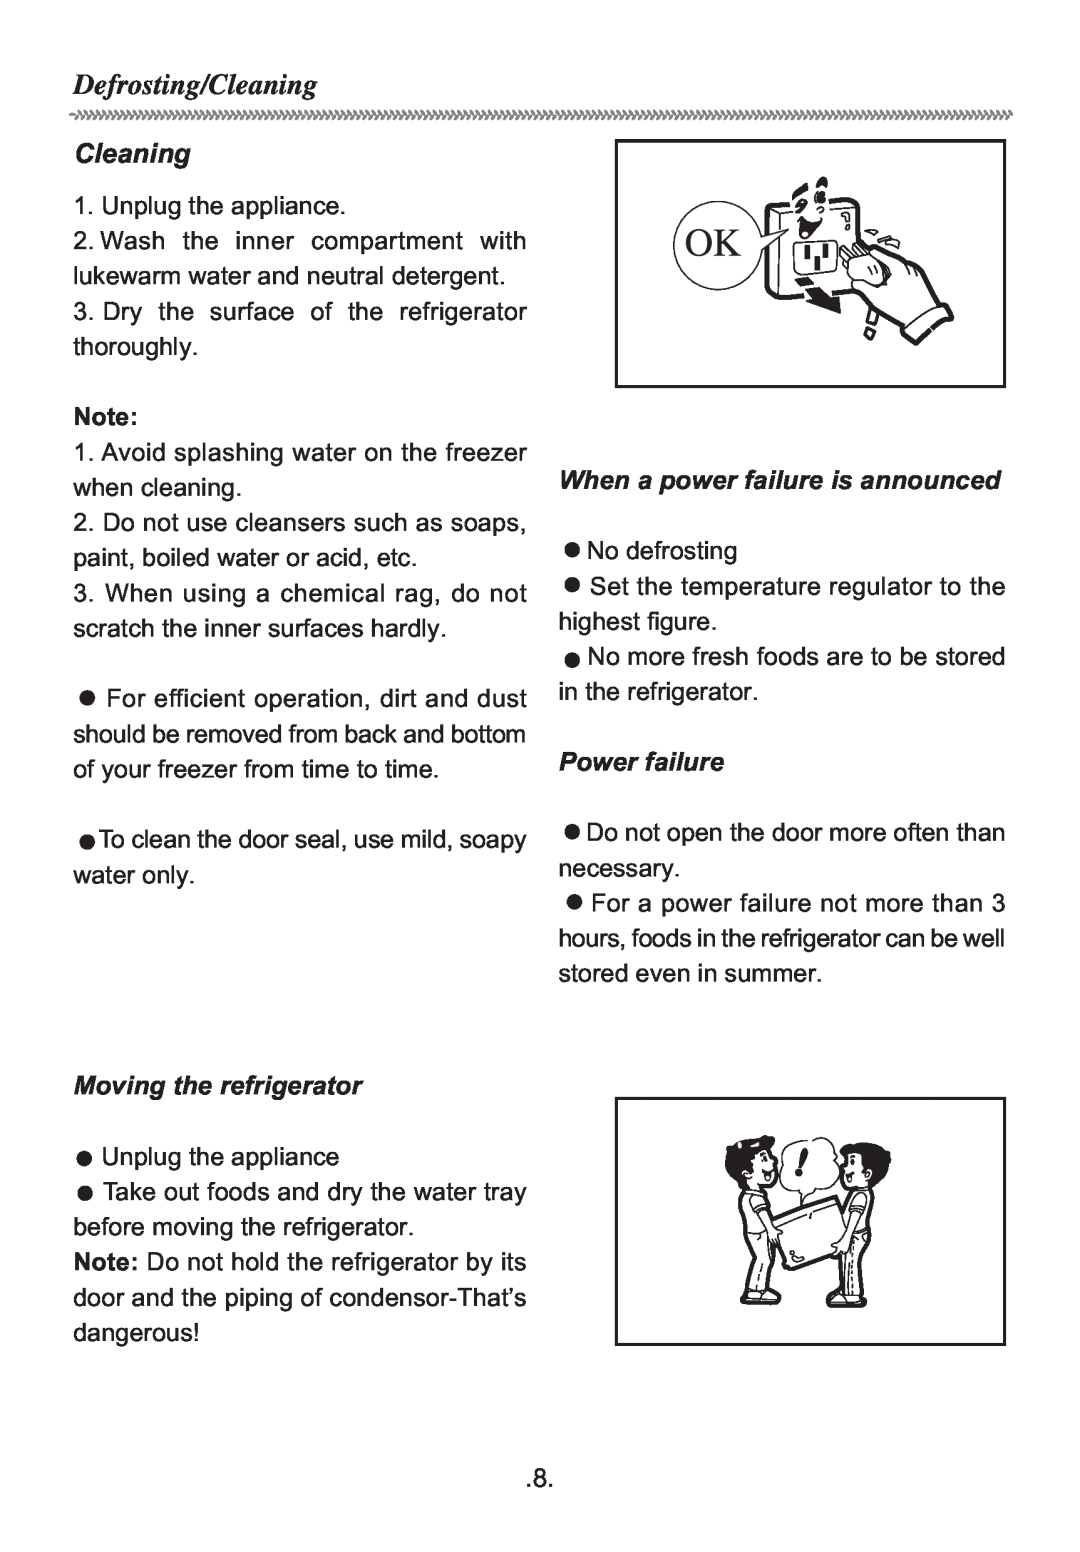 Haier HR-170U manual When a power failure is announced, Power failure, Moving the refrigerator, Defrosting/Cleaning 